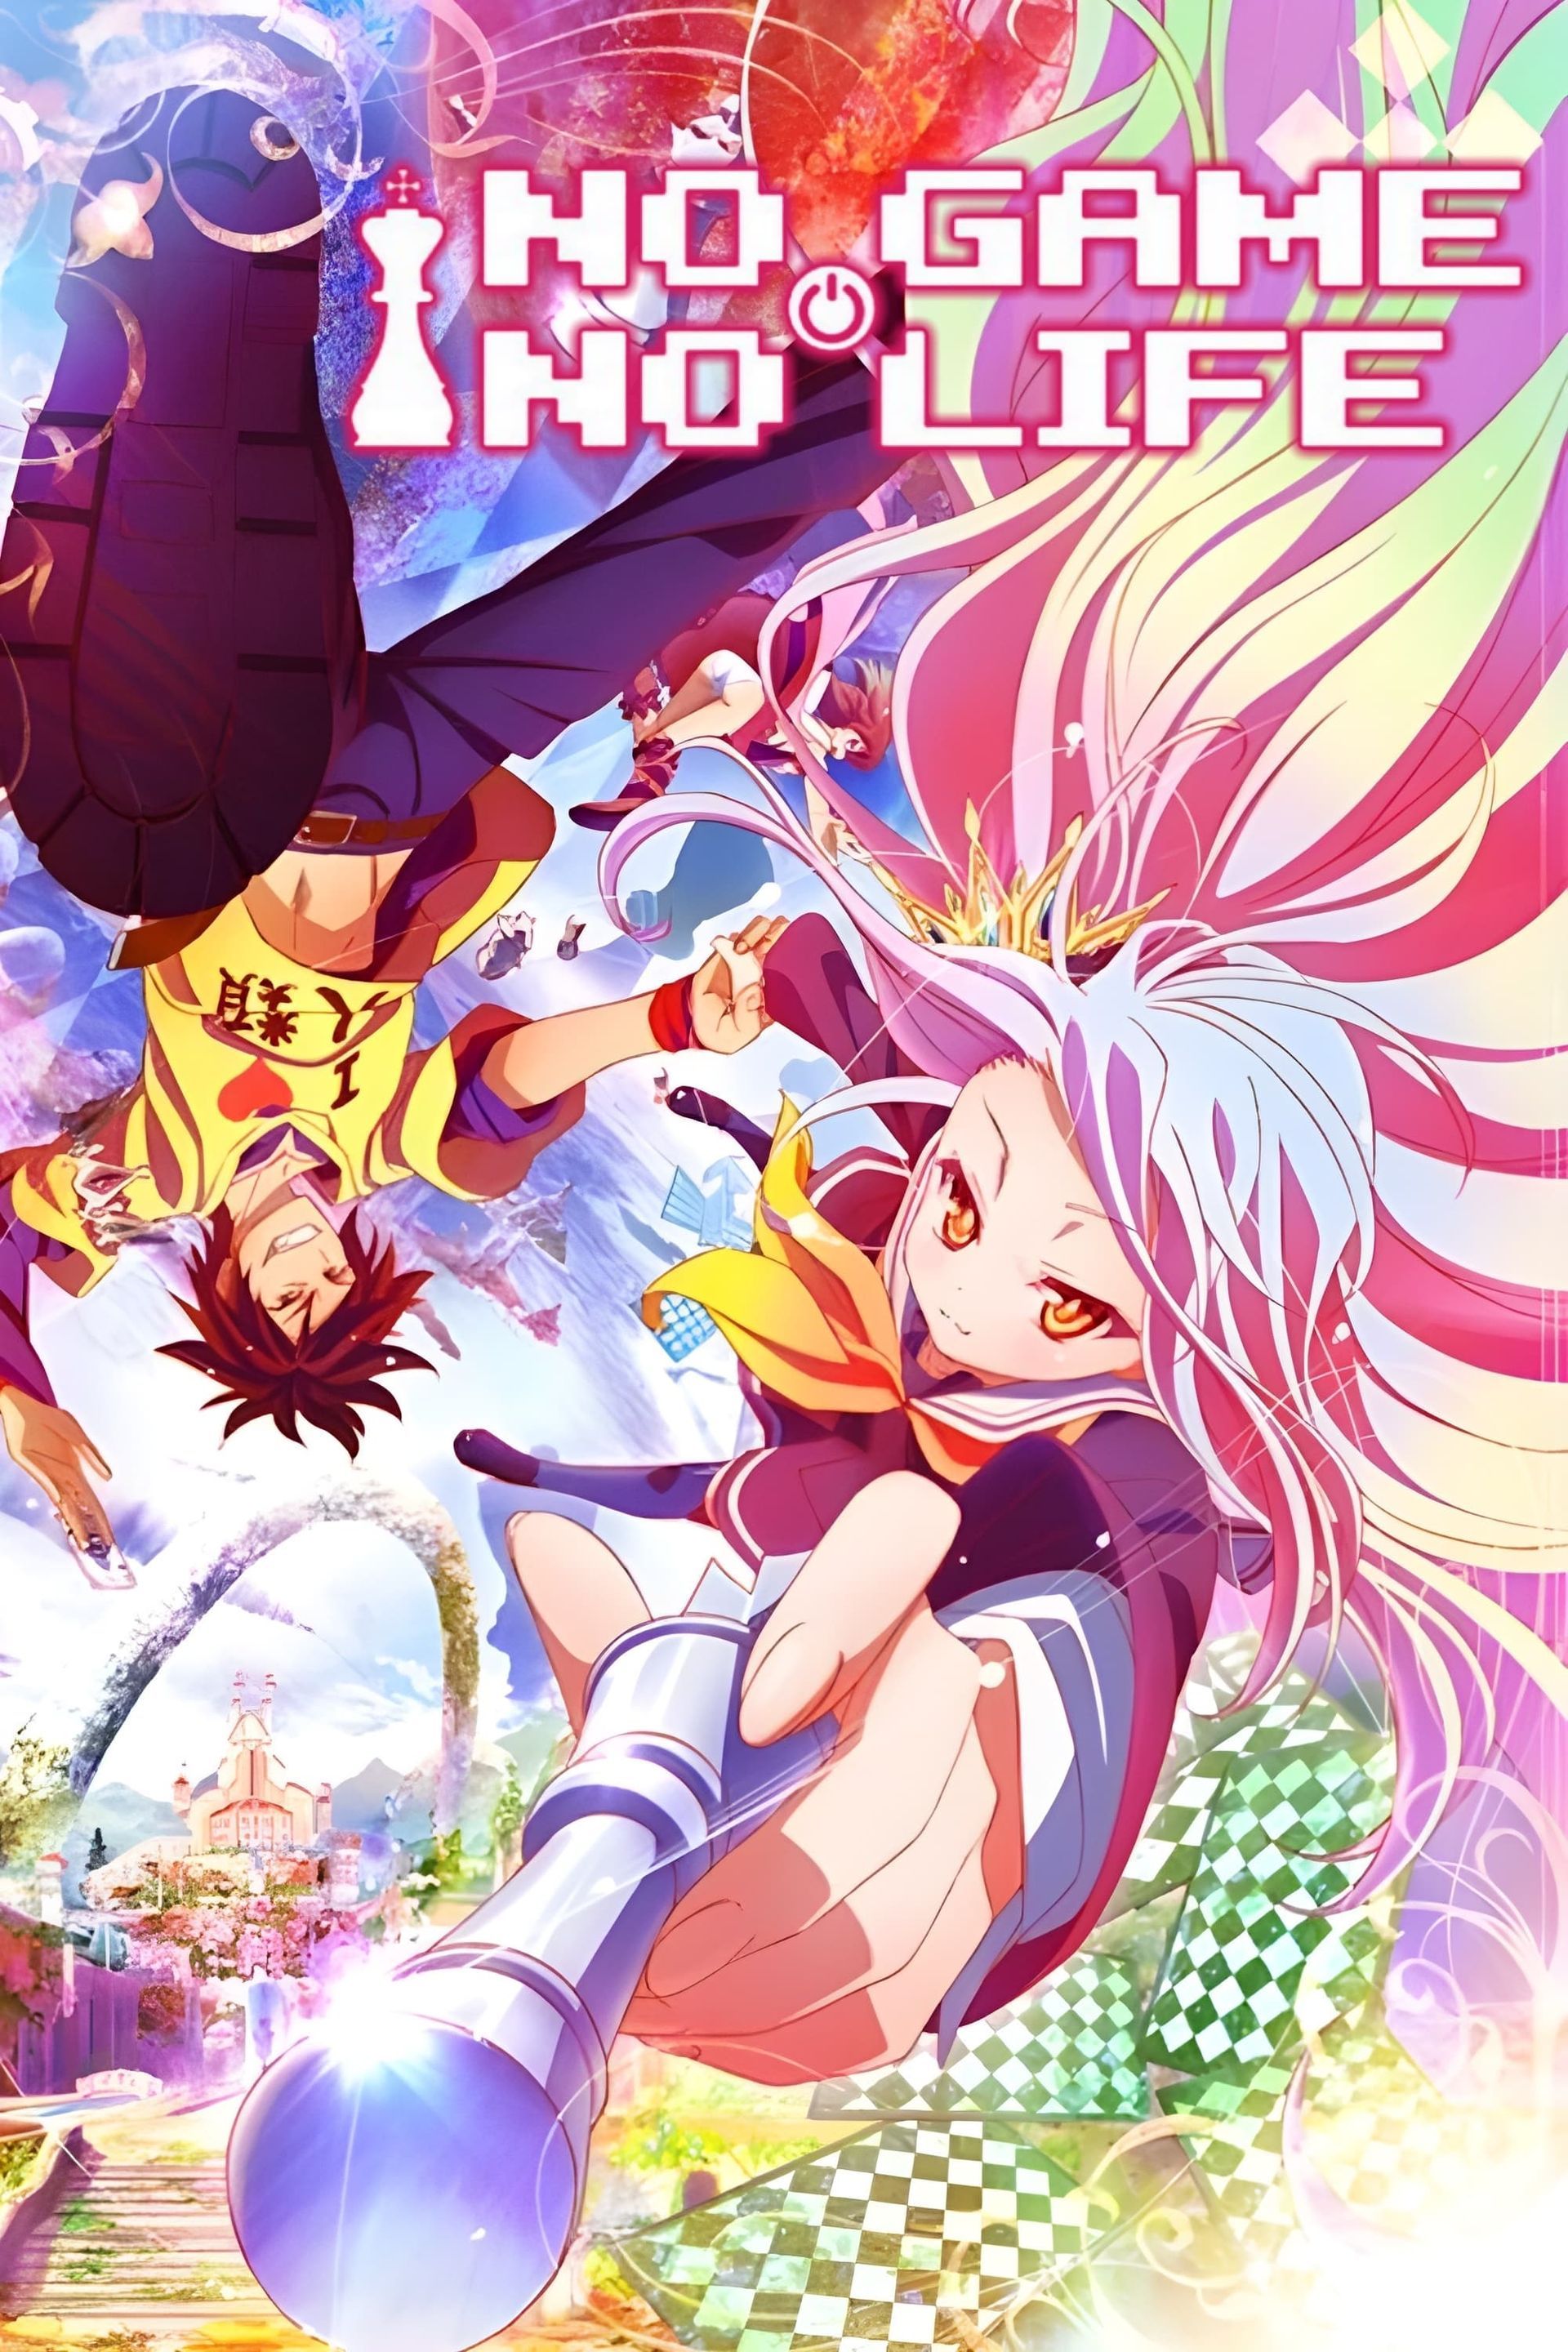 Here's How You Can Watch Every Episode Of No Game, No Life